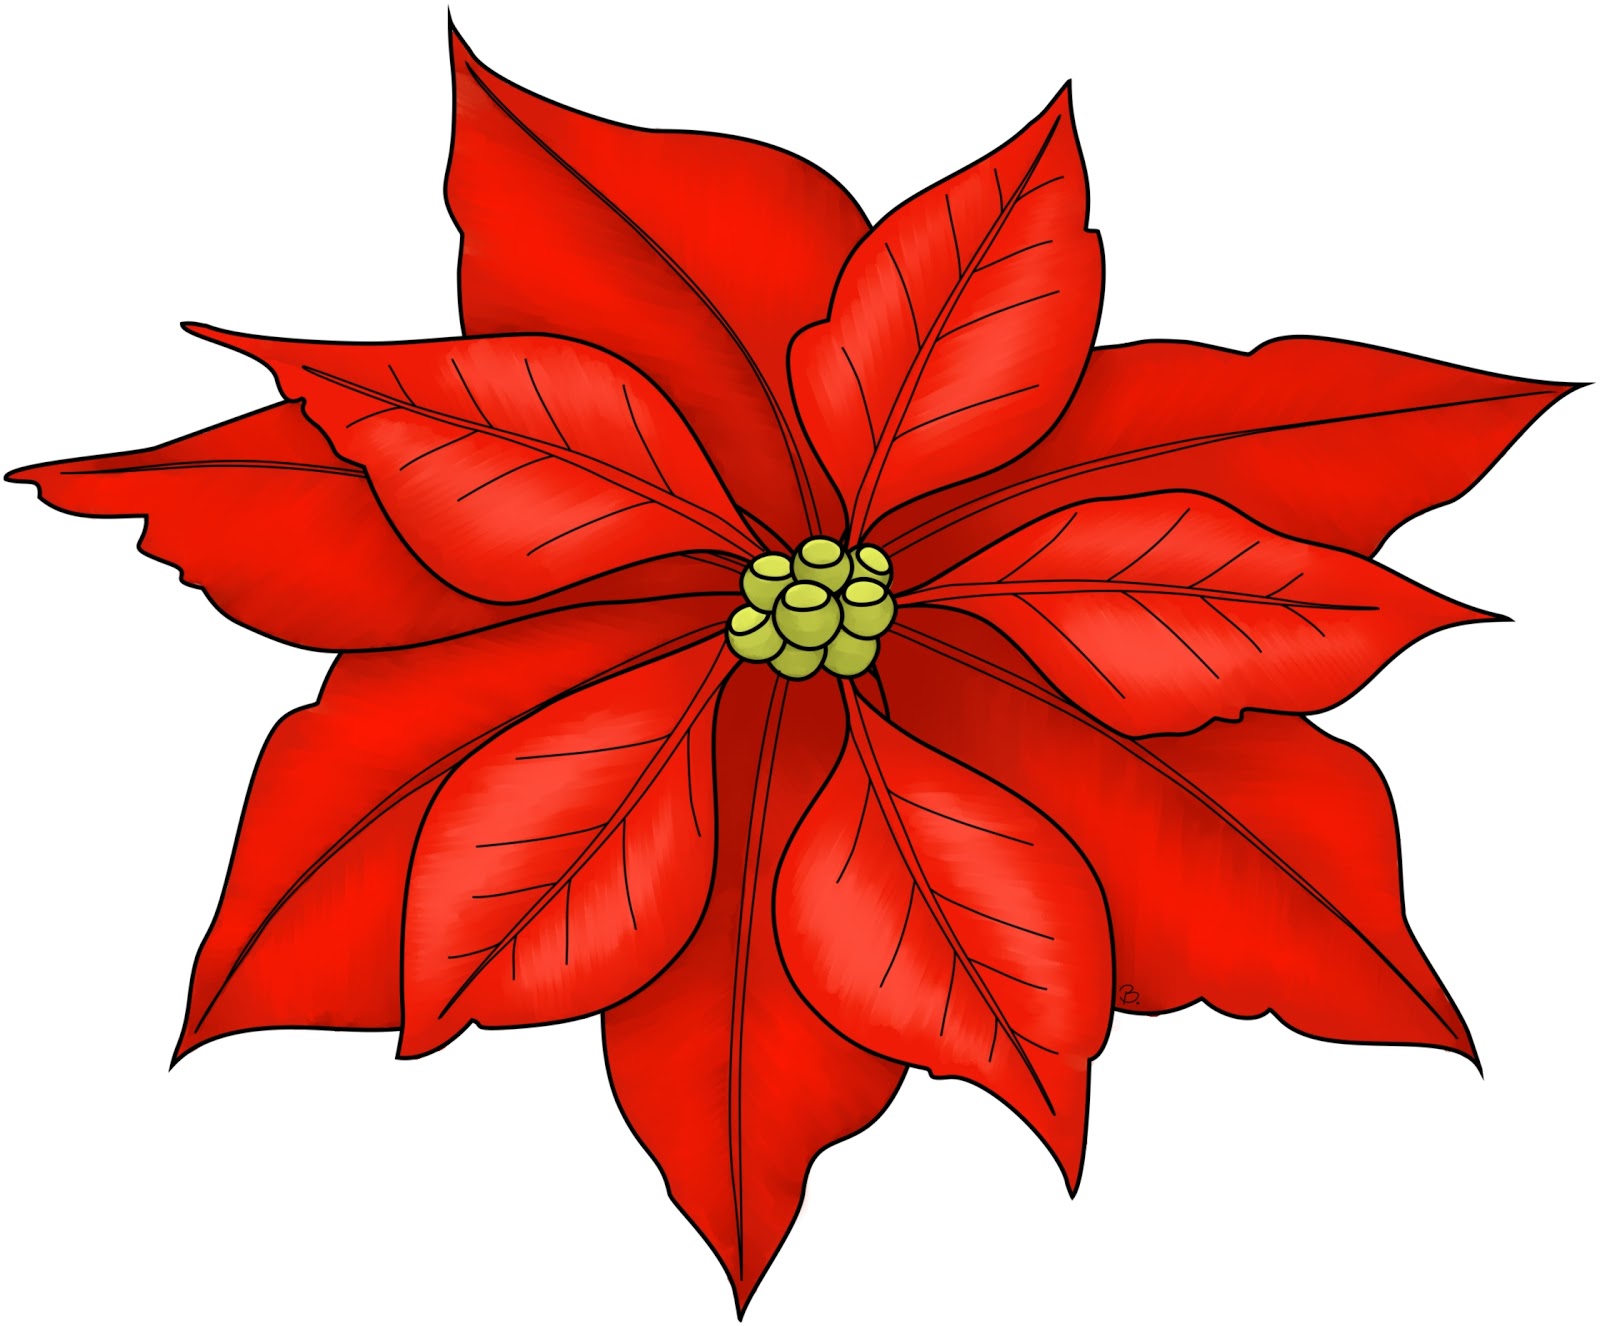 December 12th Is Poinsettia Day